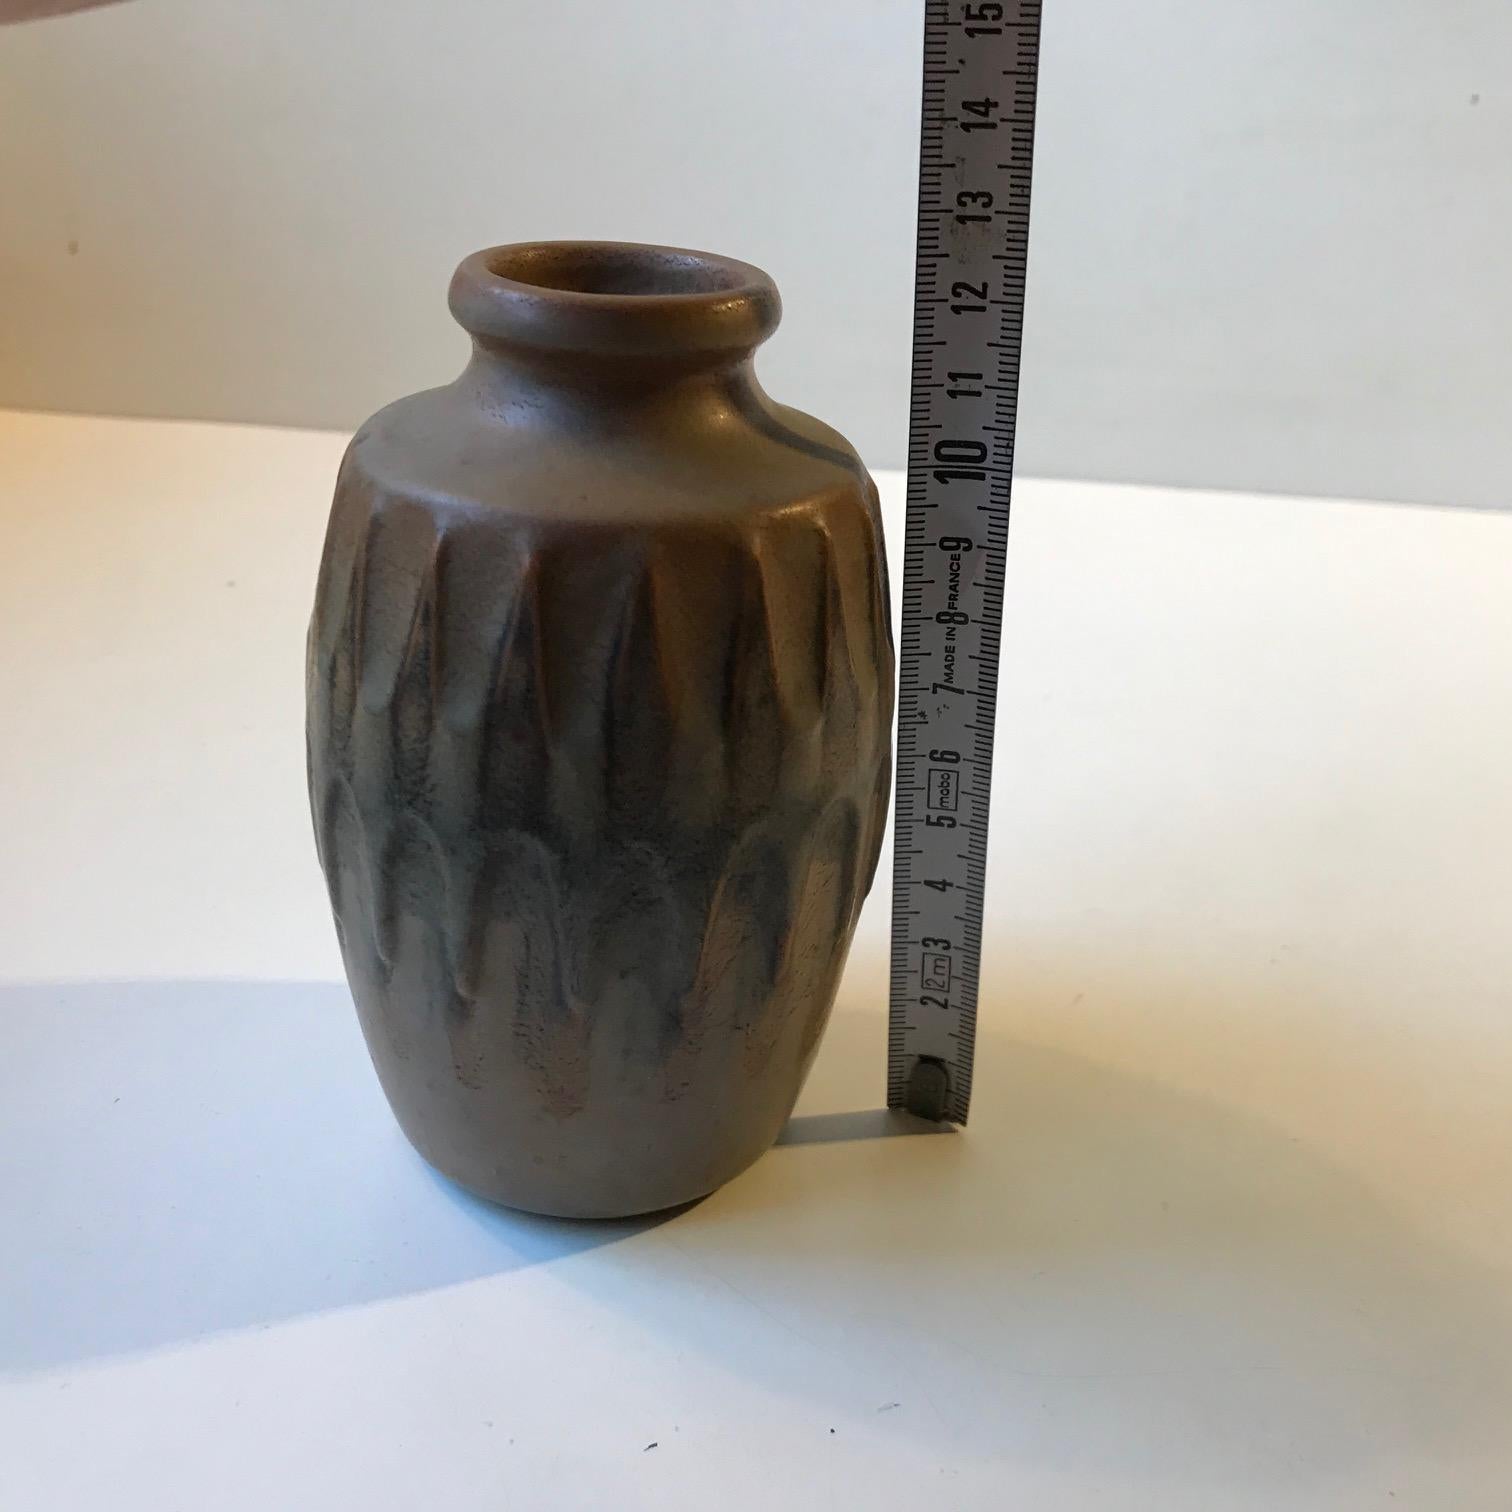 Scandinavian Pottery Vase with Camou Glaze by Günther Praschak for Knabstrup In Good Condition For Sale In Esbjerg, DK